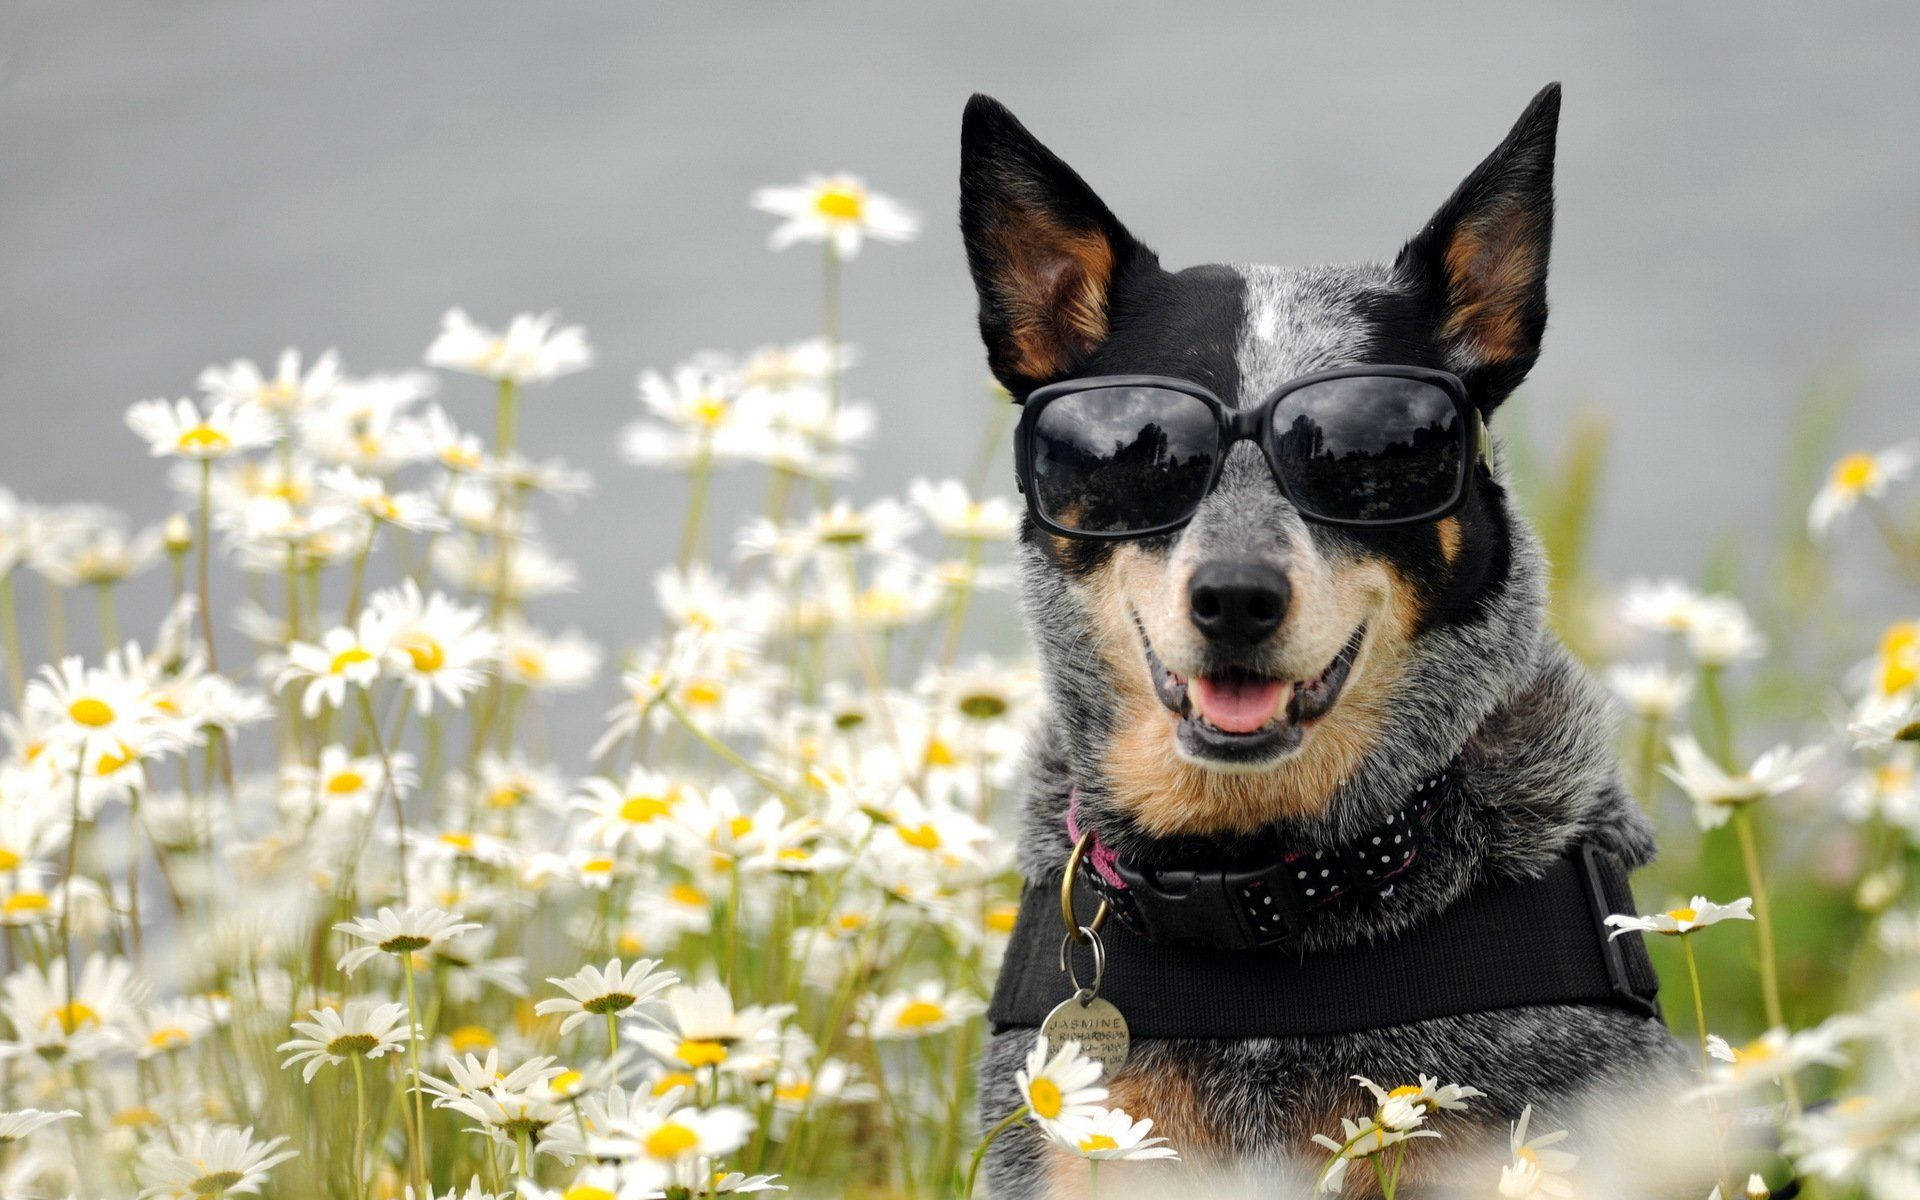 Black Gray Dog With Sunglasses In Daisies Background